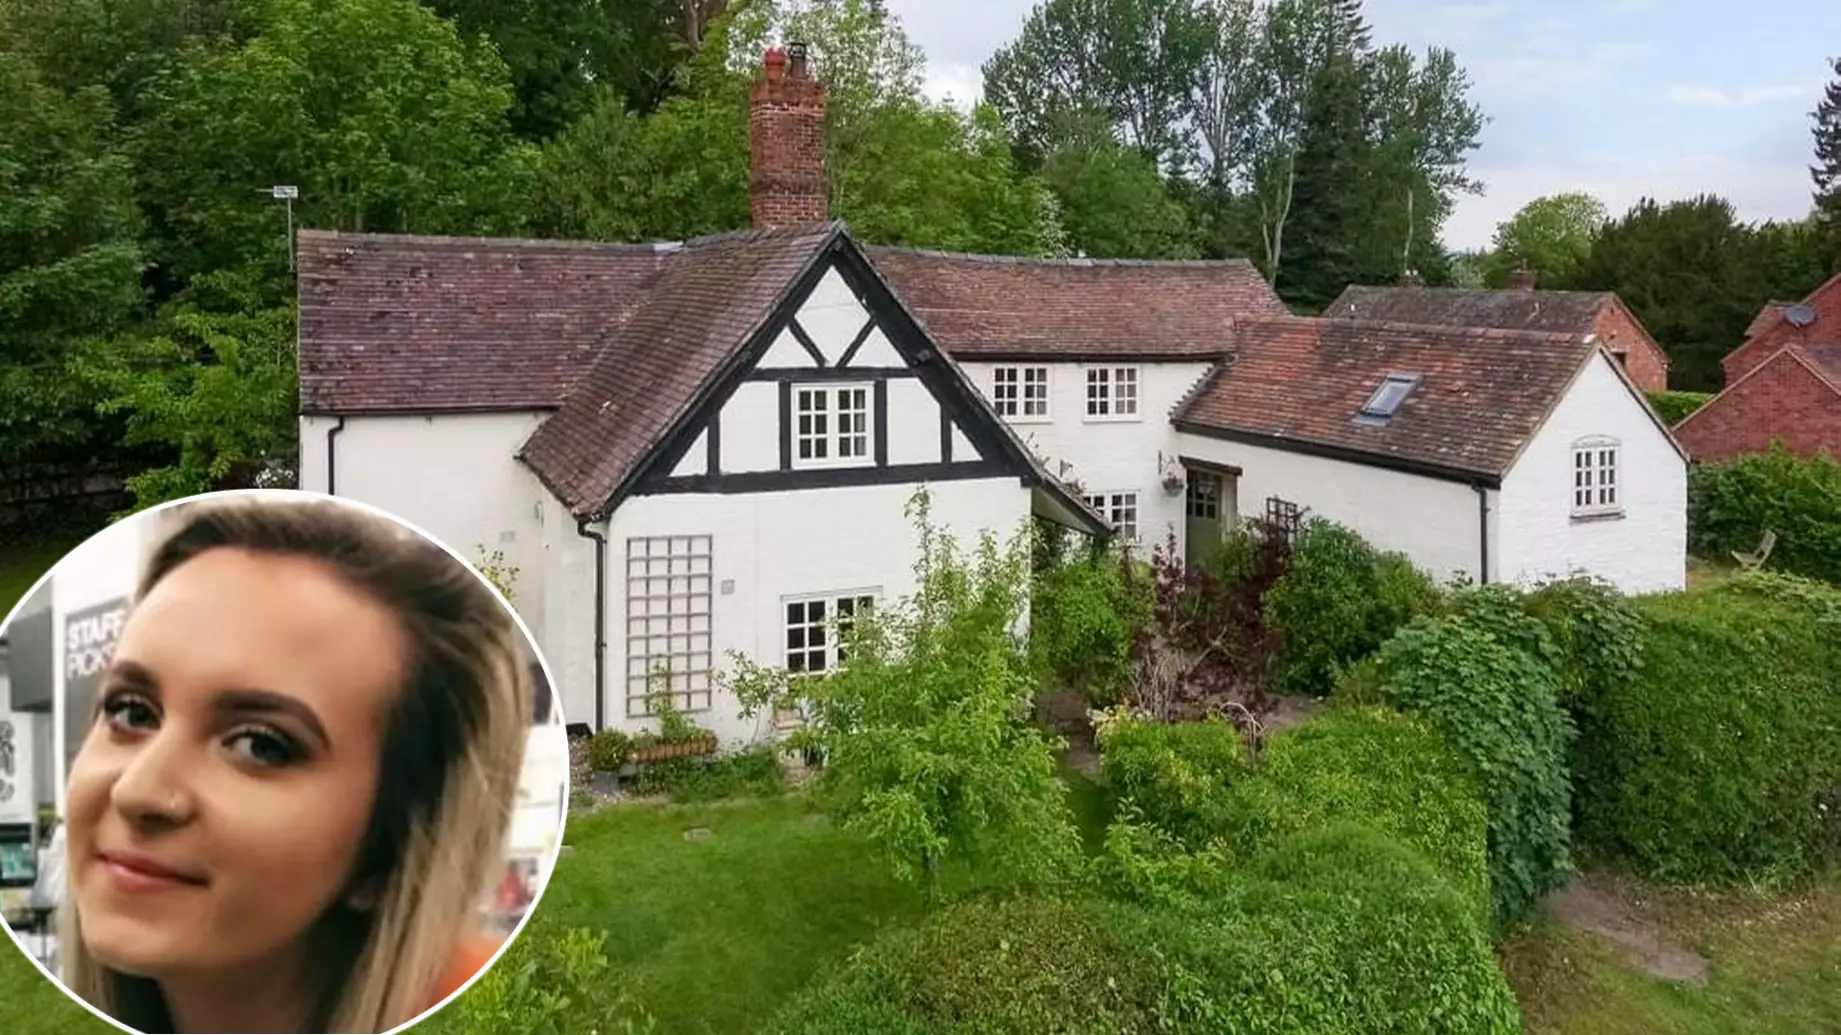 Woman Wins Amazing £500k Farmhouse After Buying £2 Raffle Ticket